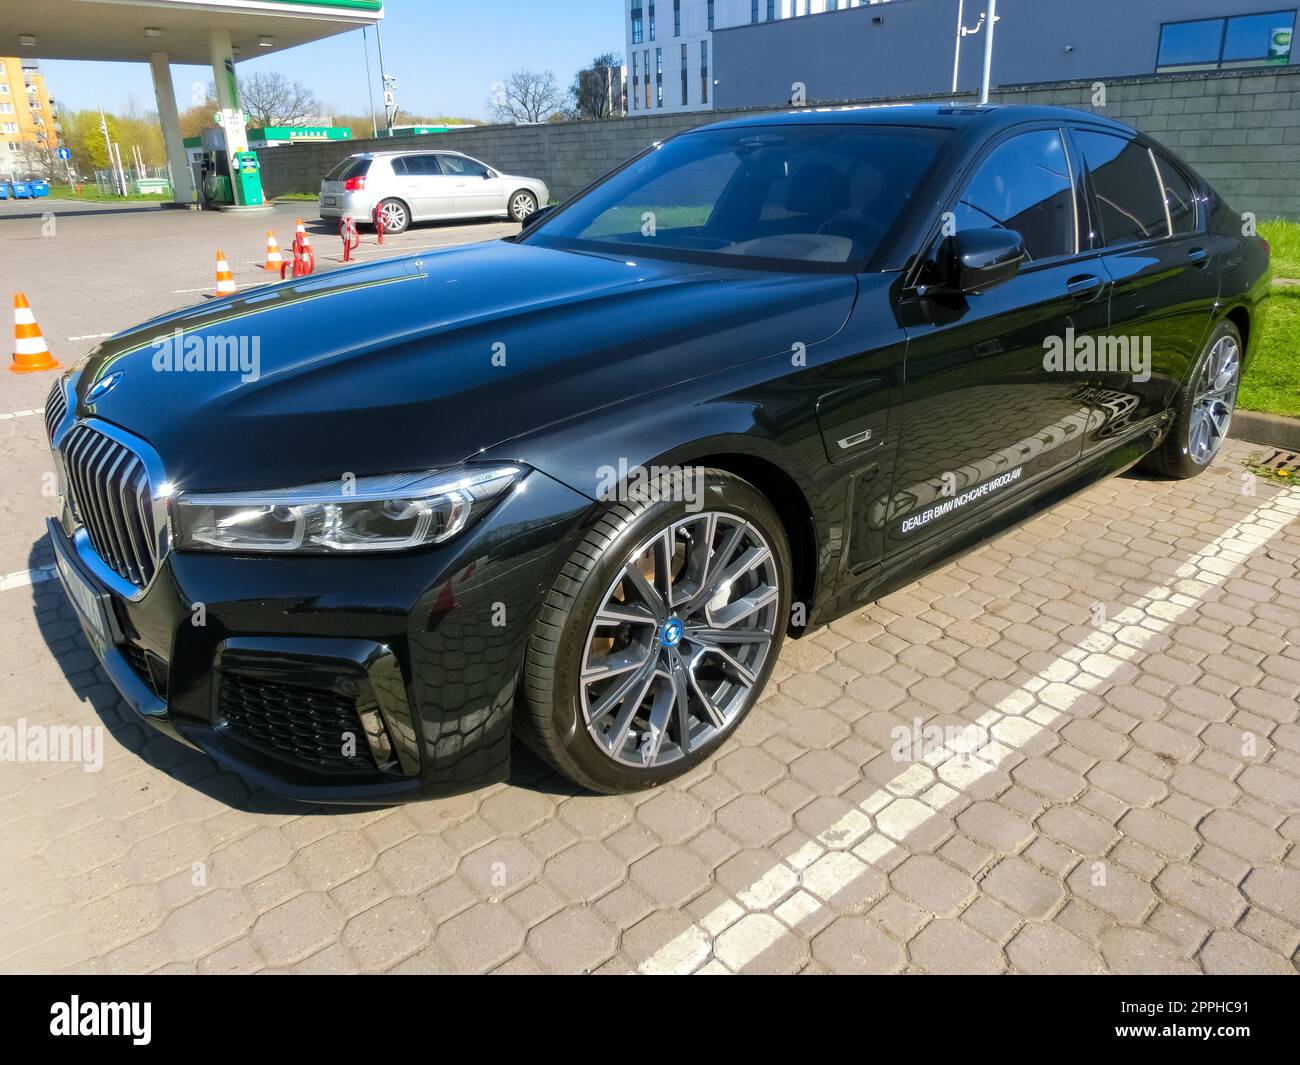 BMW Inchcape Motor car dealership with car parked on forecourt. Stock Photo